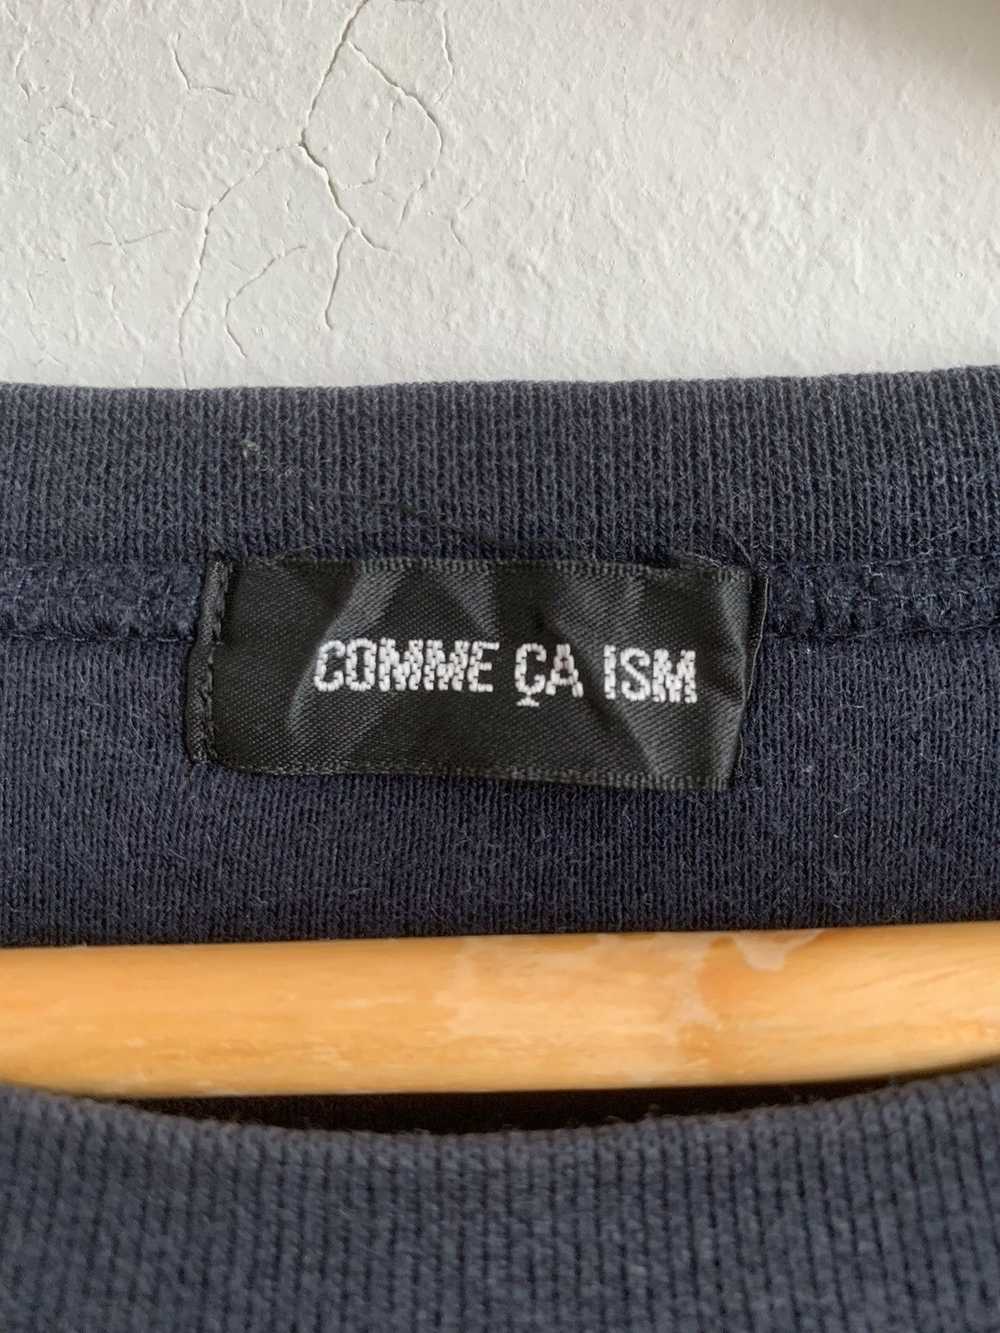 Comme Ca Ism × Japanese Brand Comme Ca Ism Sweats… - image 5